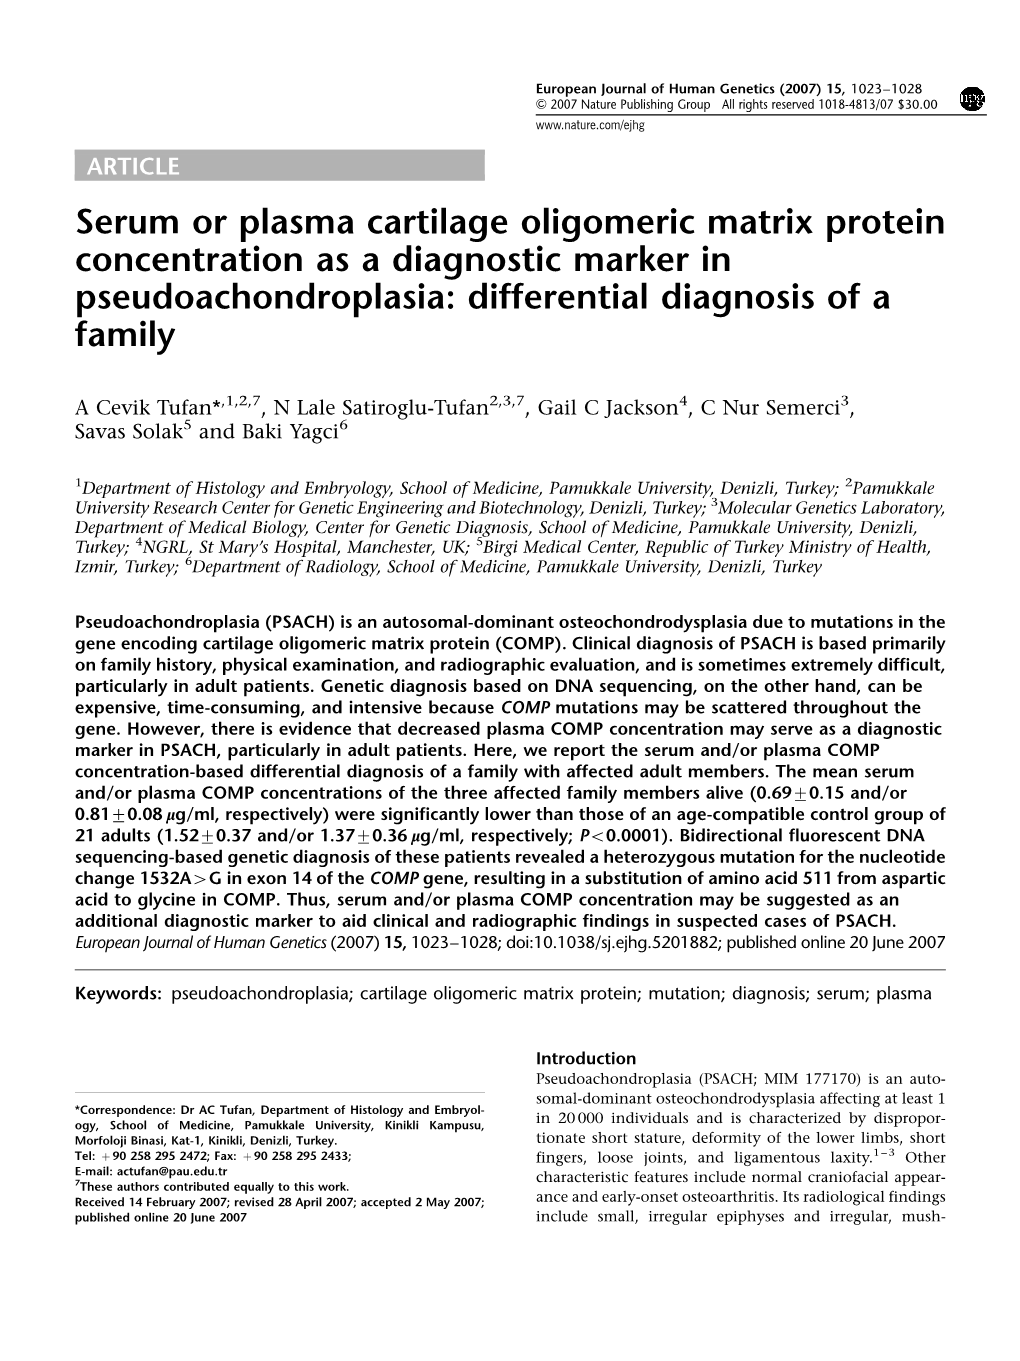 Serum Or Plasma Cartilage Oligomeric Matrix Protein Concentration As a Diagnostic Marker in Pseudoachondroplasia: Differential Diagnosis of a Family